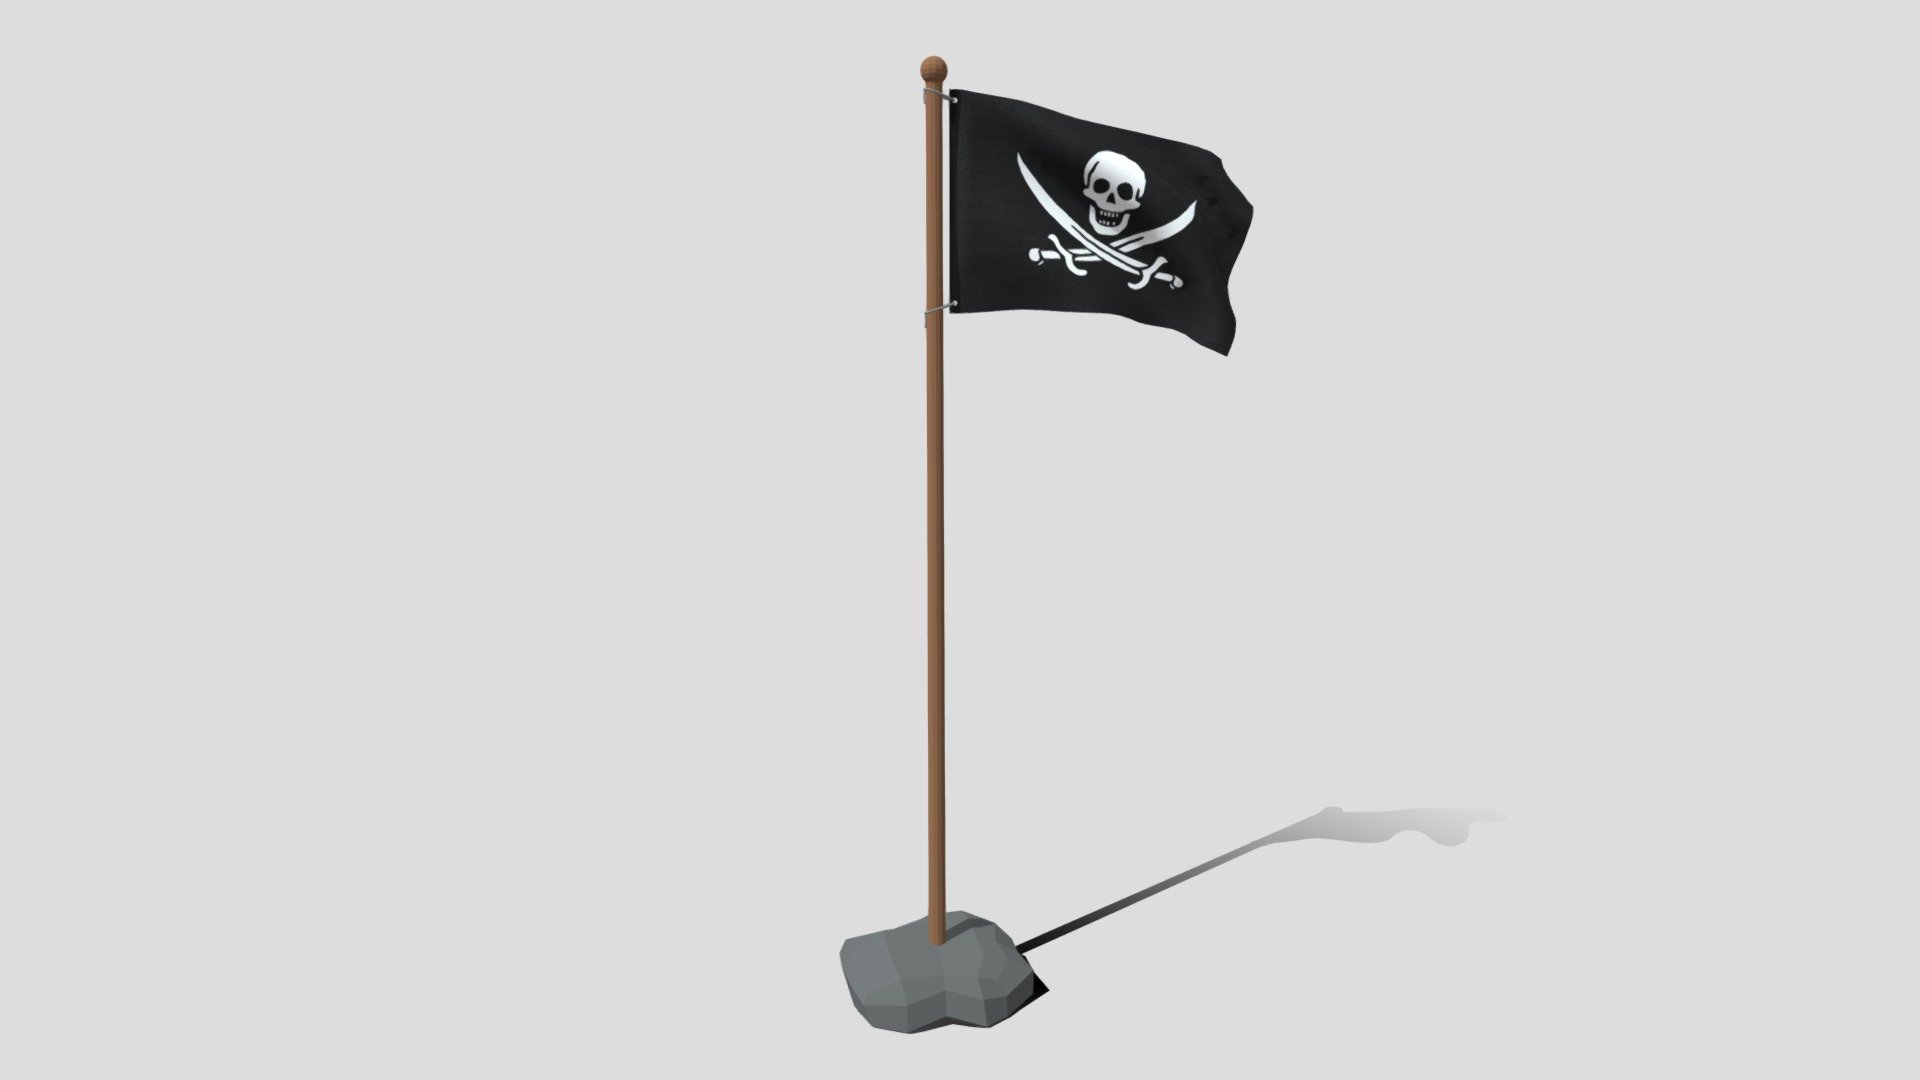 This is a low poly 3D model of an animated pirate flag. The low poly flag was modeled and prepared for low-poly style renderings, background, general CG visualization presented as 2 meshes with quads only.

Verts : 1.315 Faces : 1.247.

1024x1024 textures included. Diffuse, roughness and normal maps available only for flag. The pole have simple materials with colors.

The animation is based on shapekeys, 248 frames and seamless, no rig included.

The original file was created in blender. You will receive a OBJ, FBX, blend, DAE, Stl, gLTF, abc.

PLEASE NOTE Animation icluded only in blend, abc and glTF files.

Warning: Depending on which software package you are using, the exchange formats (.obj , .dae, .fbx) may not match the preview images exactly. Due to the nature of these formats, there may be some textures that have to be loaded by hand and possibly triangulated geometry 3d model